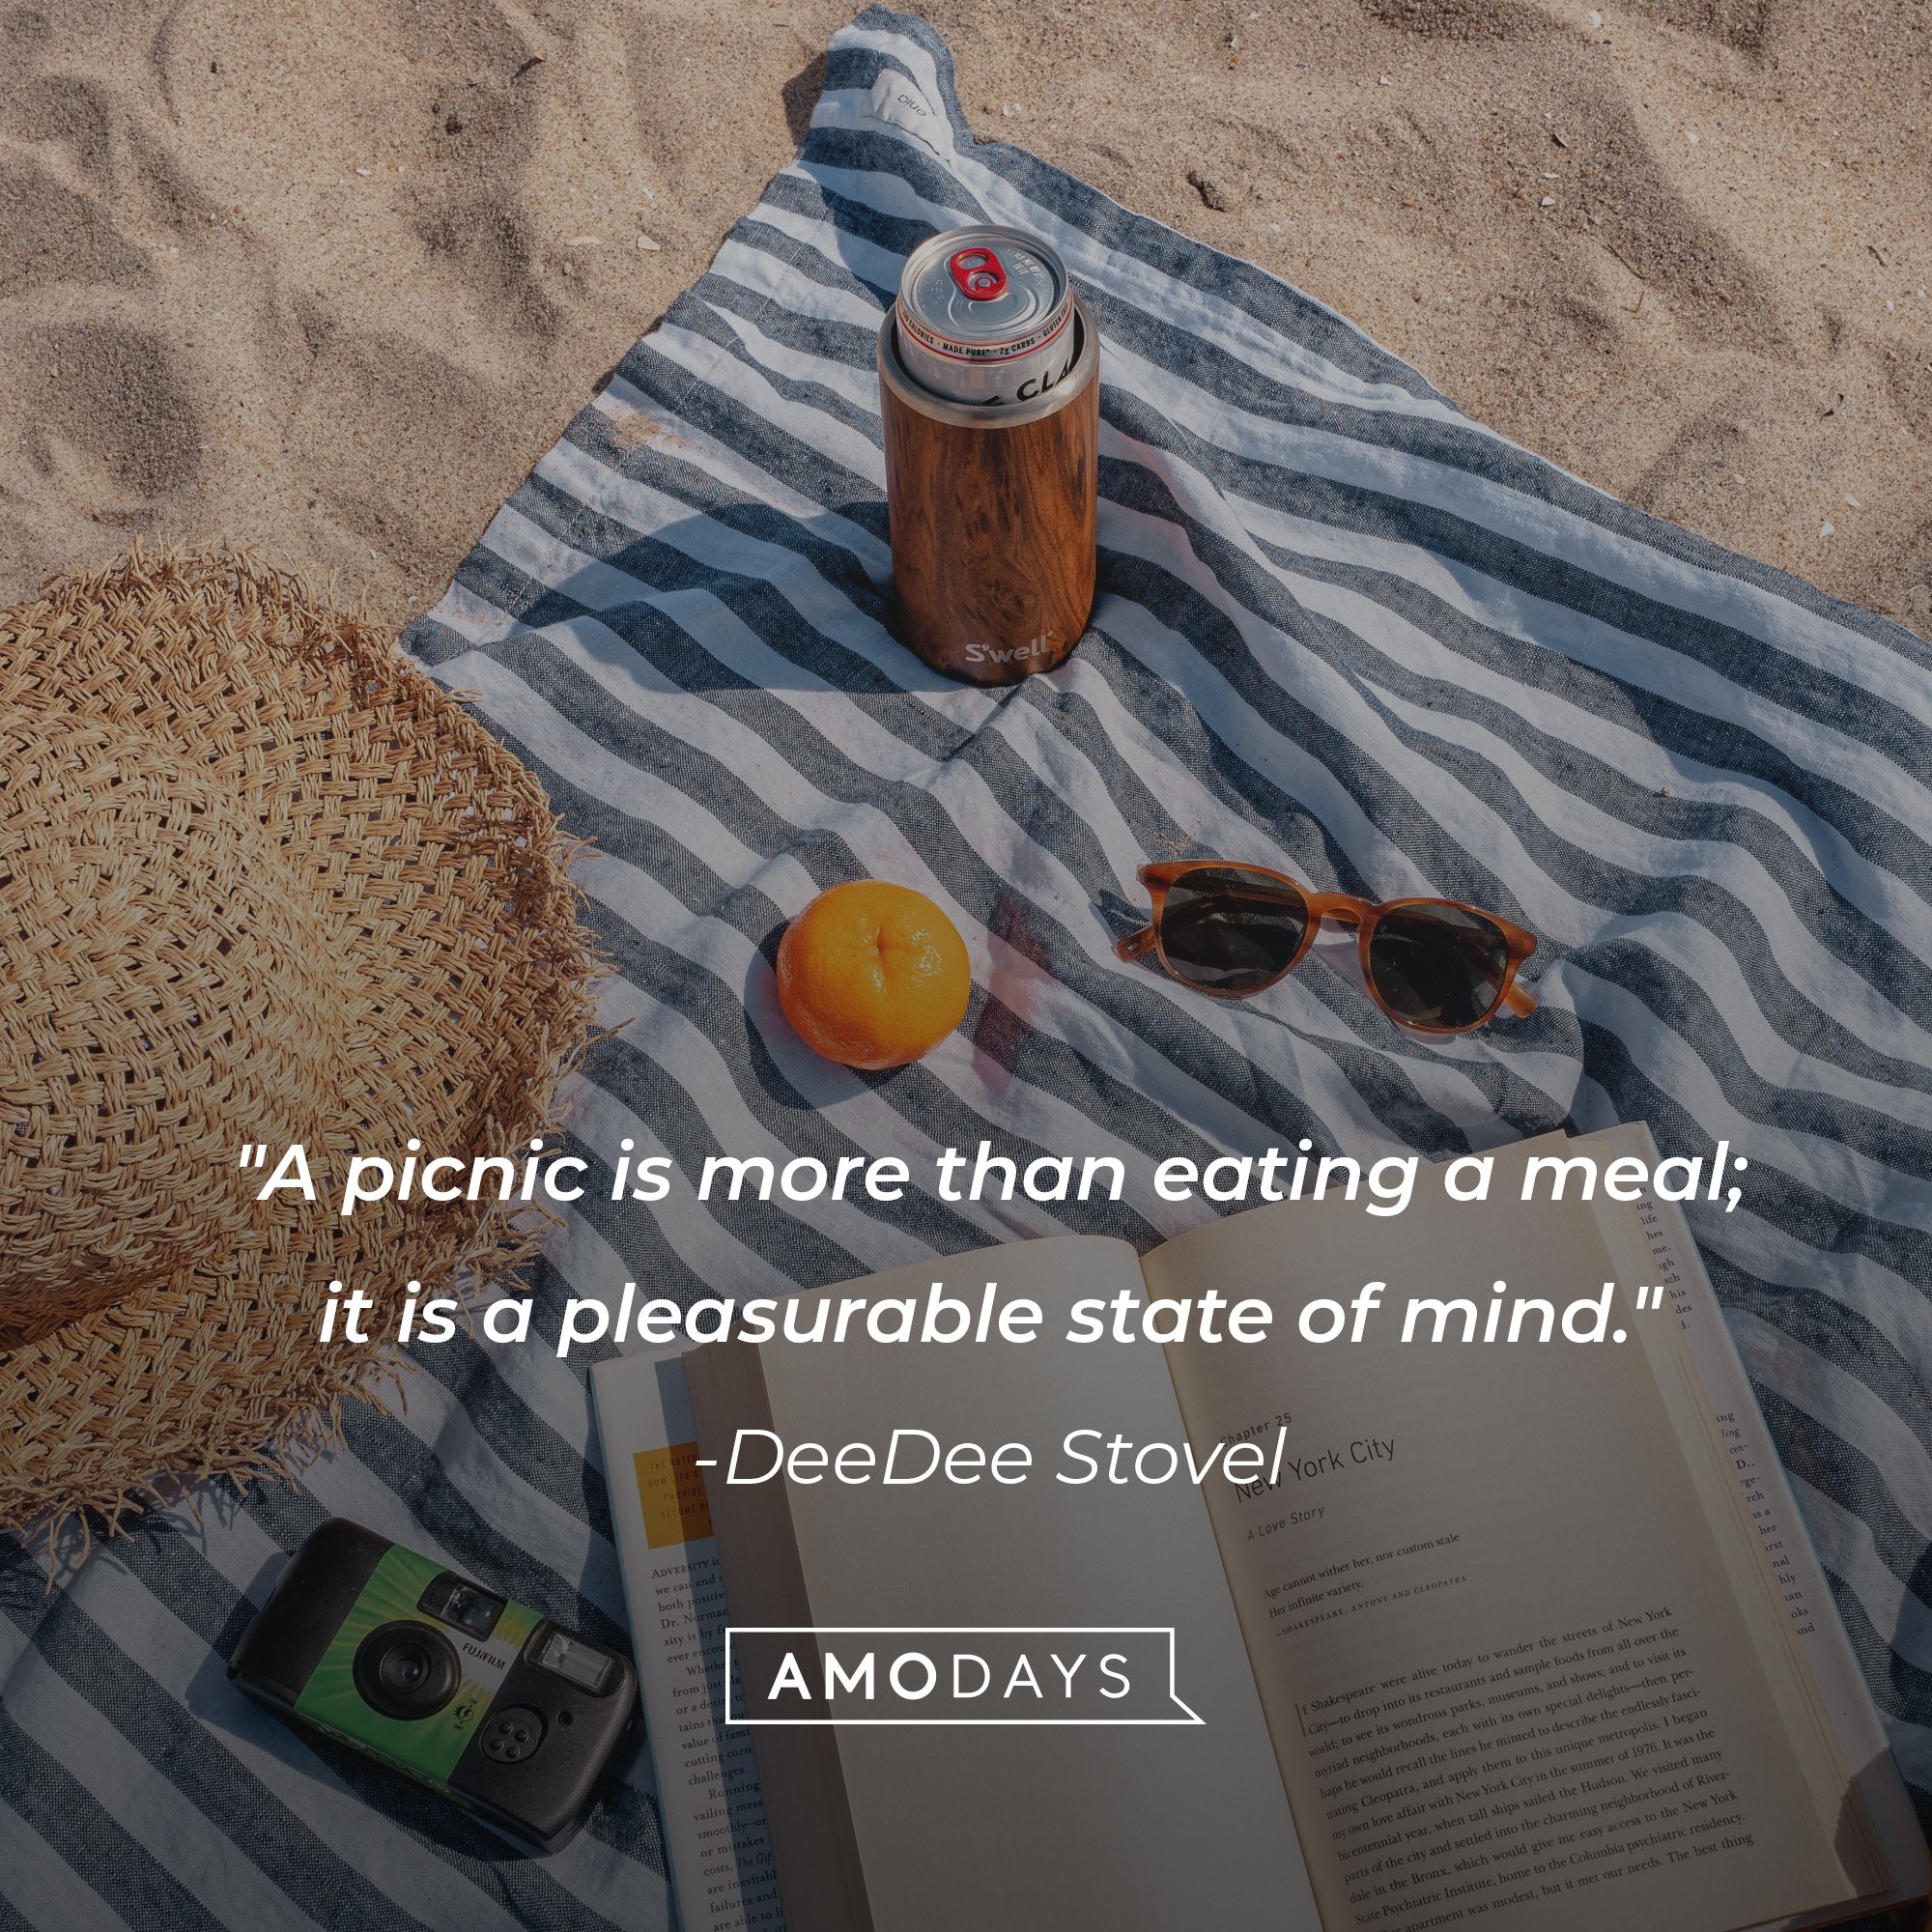 DeeDee Stovel's quote: "A picnic is more than eating a meal; it is a pleasurable state of mind." | Image: AmoDays